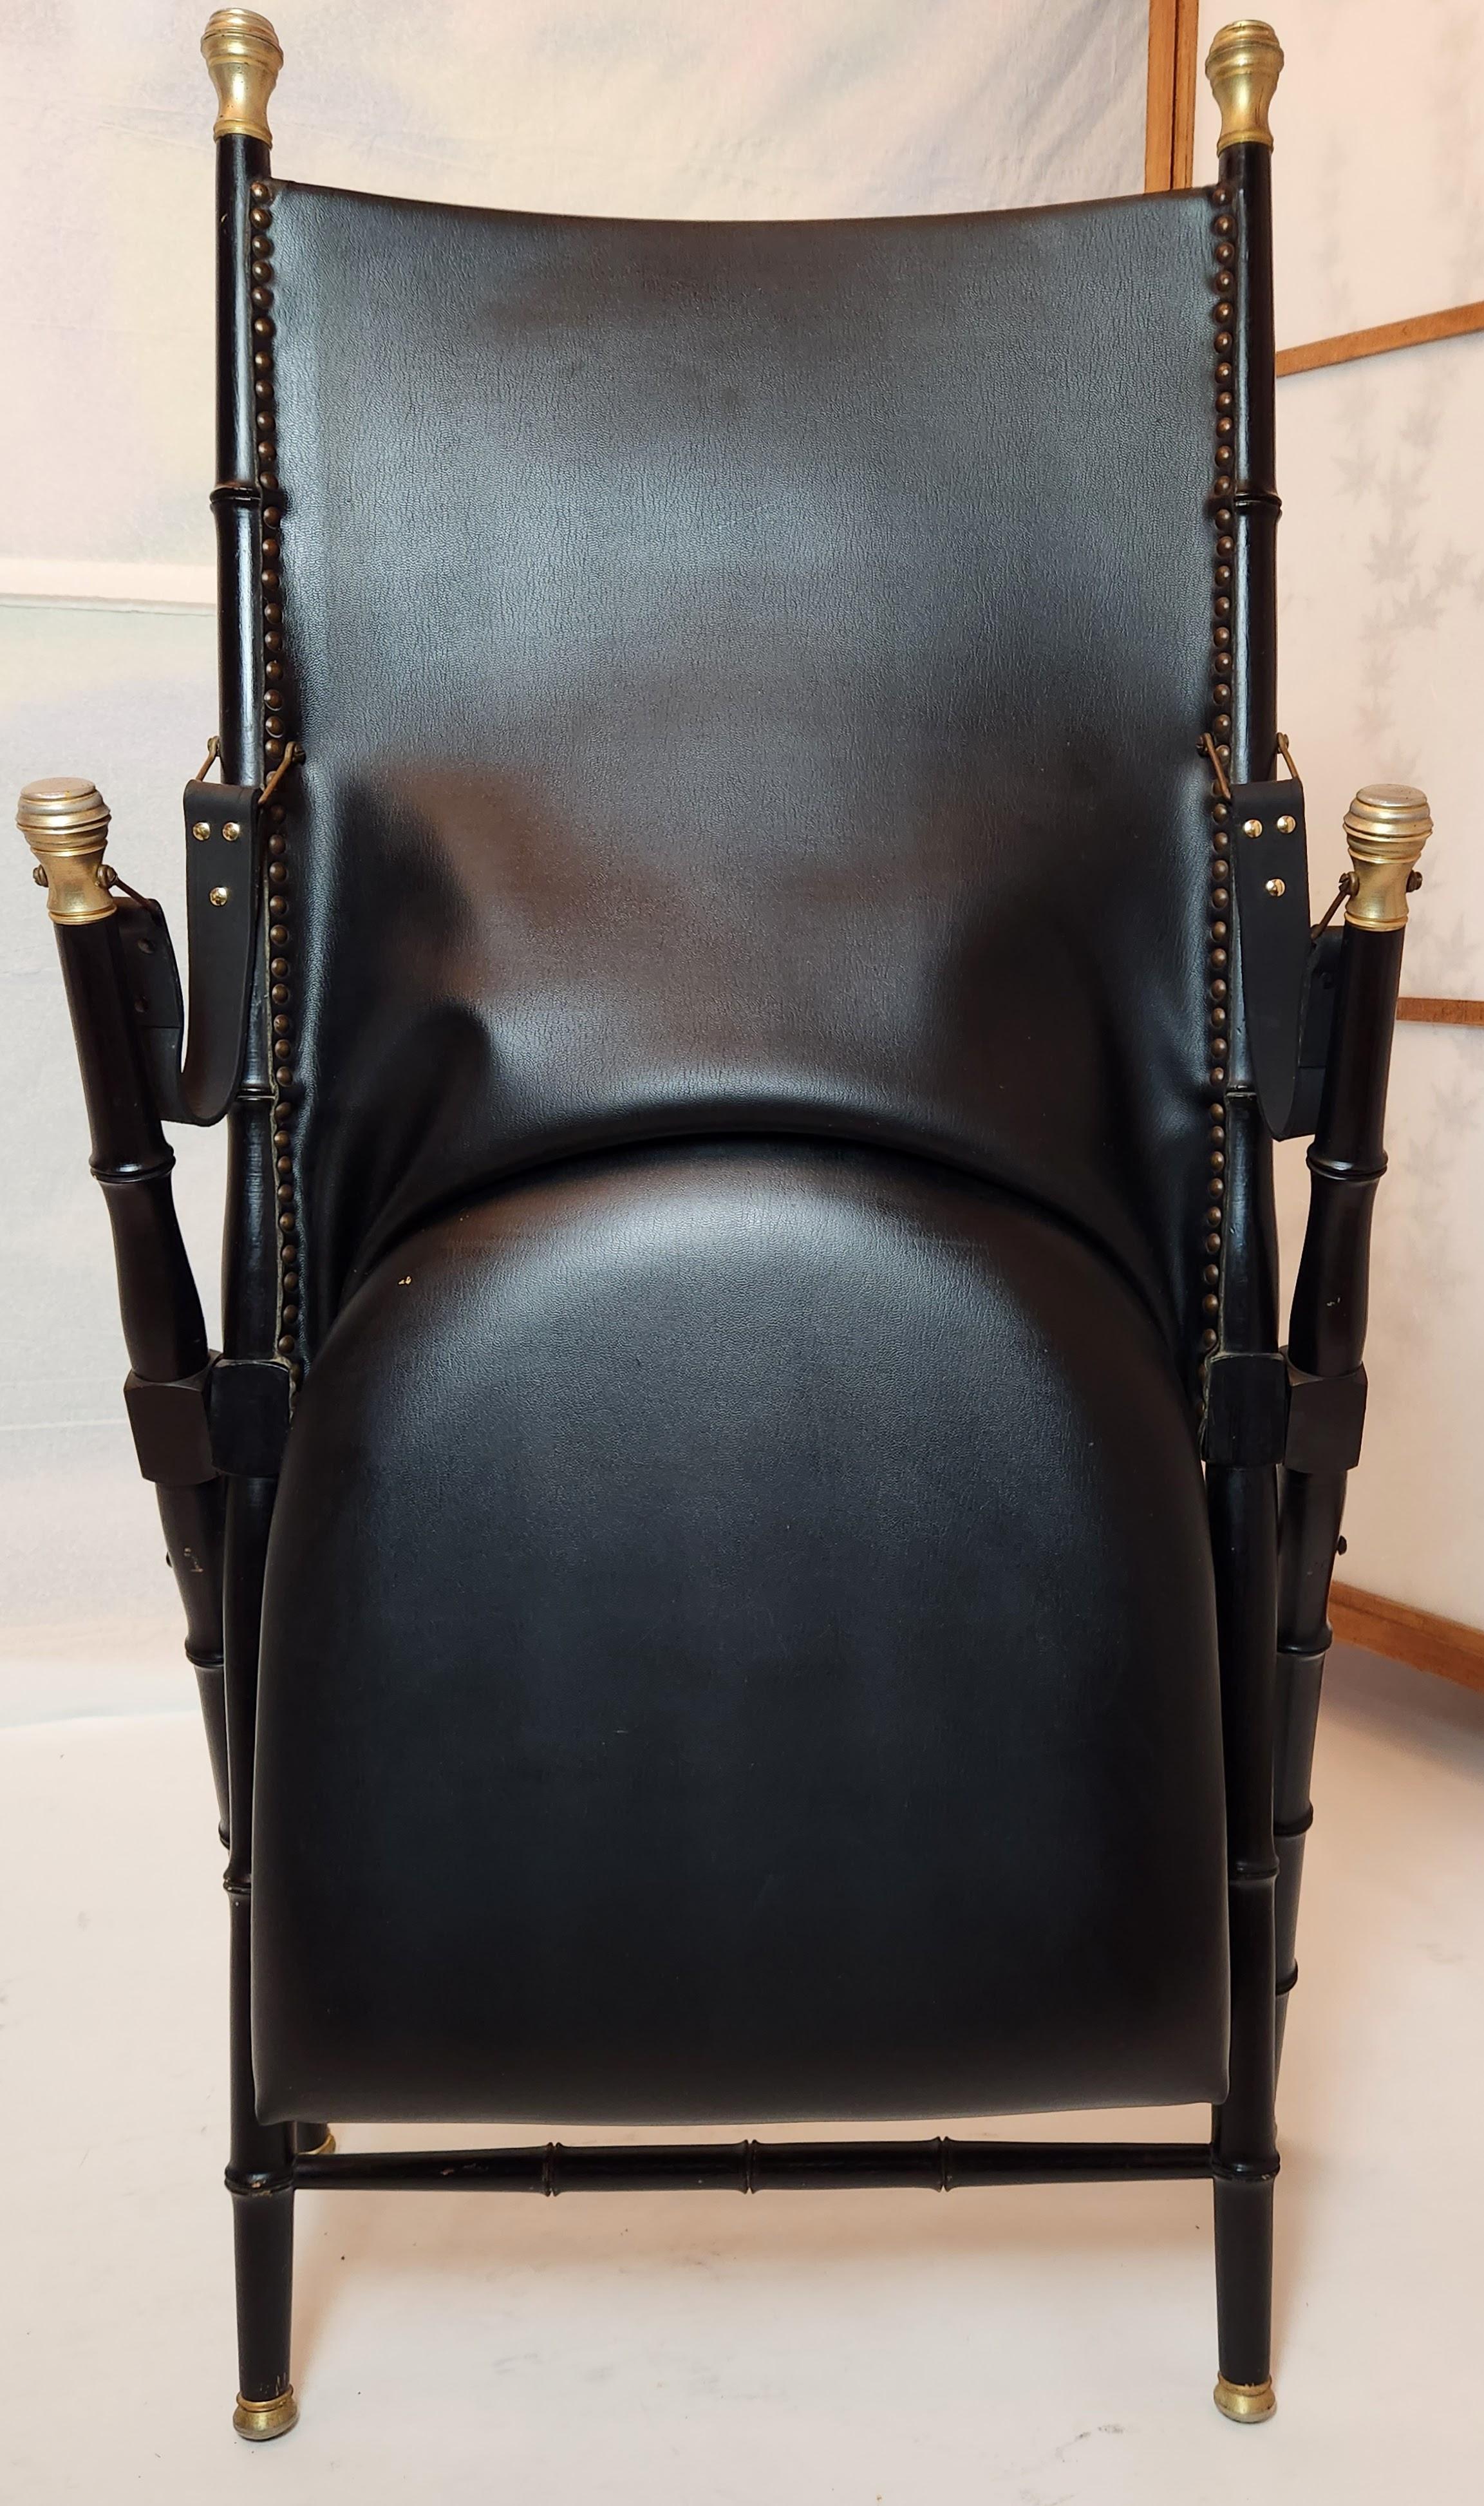 Faux Bois Classic Italian Folding Campaign Chair in Black Leather, C. 1965 For Sale